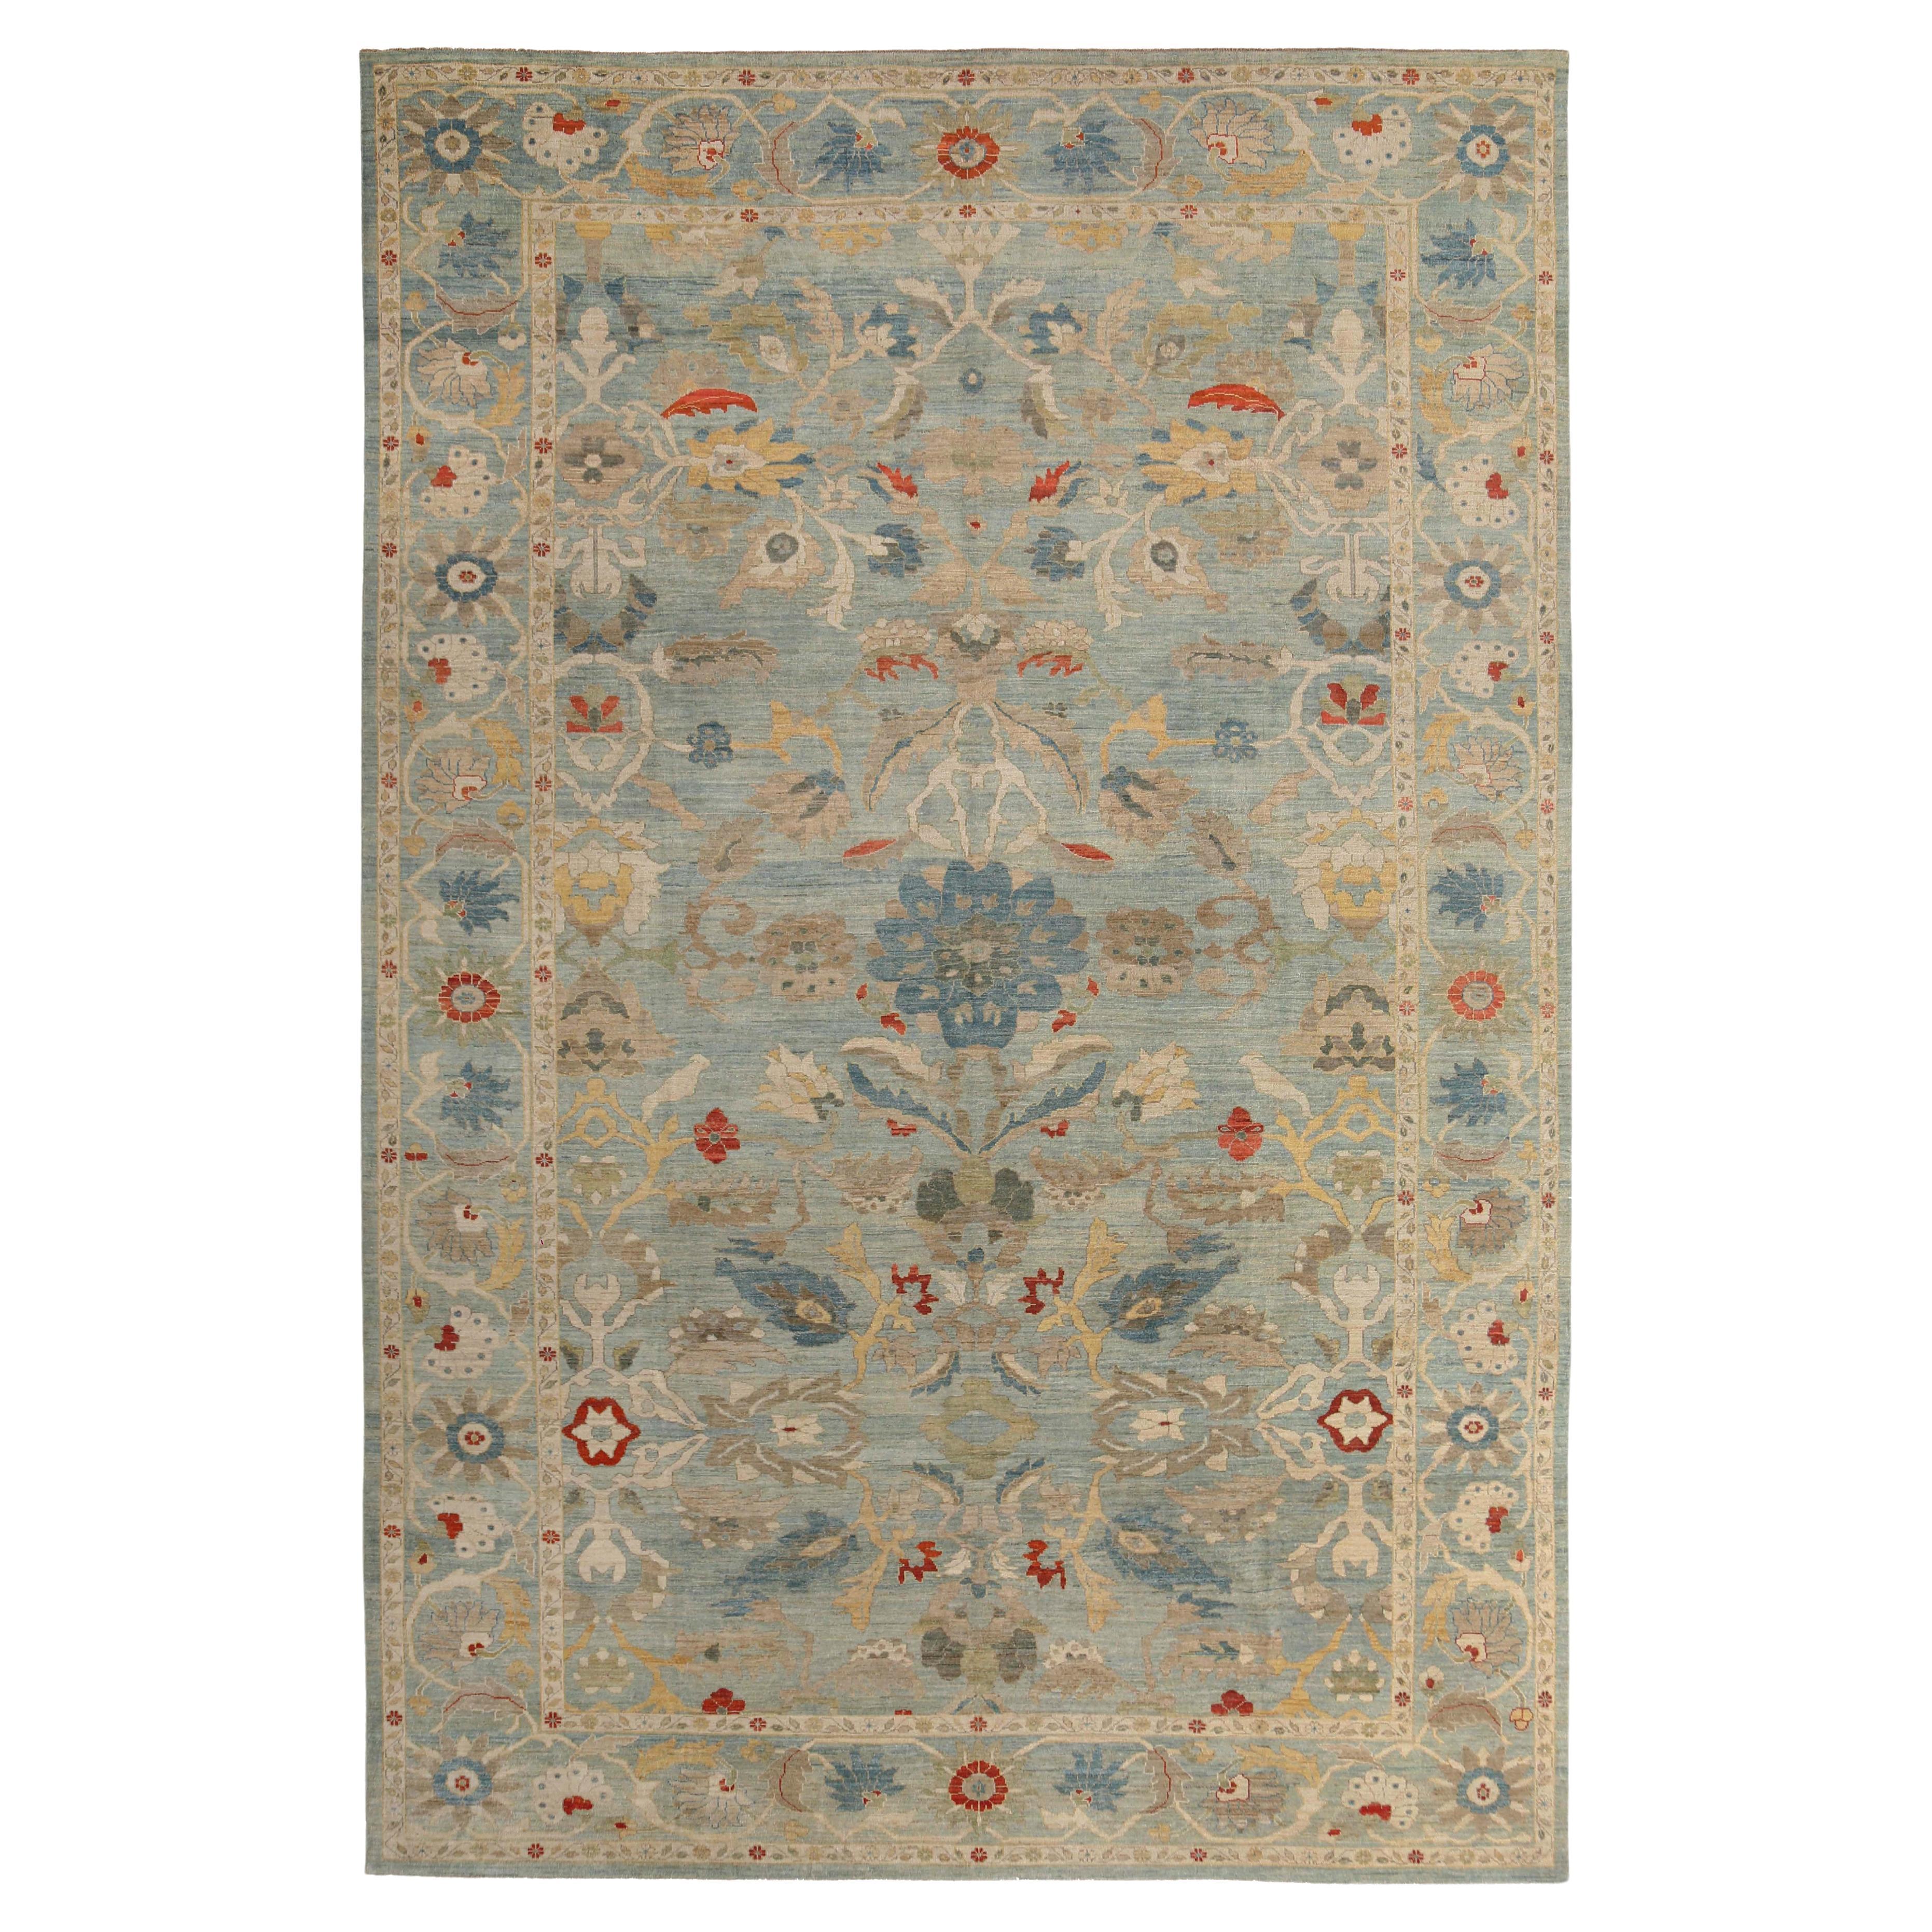 Handmade Turkish Sultanabad Rug - Traditional Design with Blue, Green, and Red C